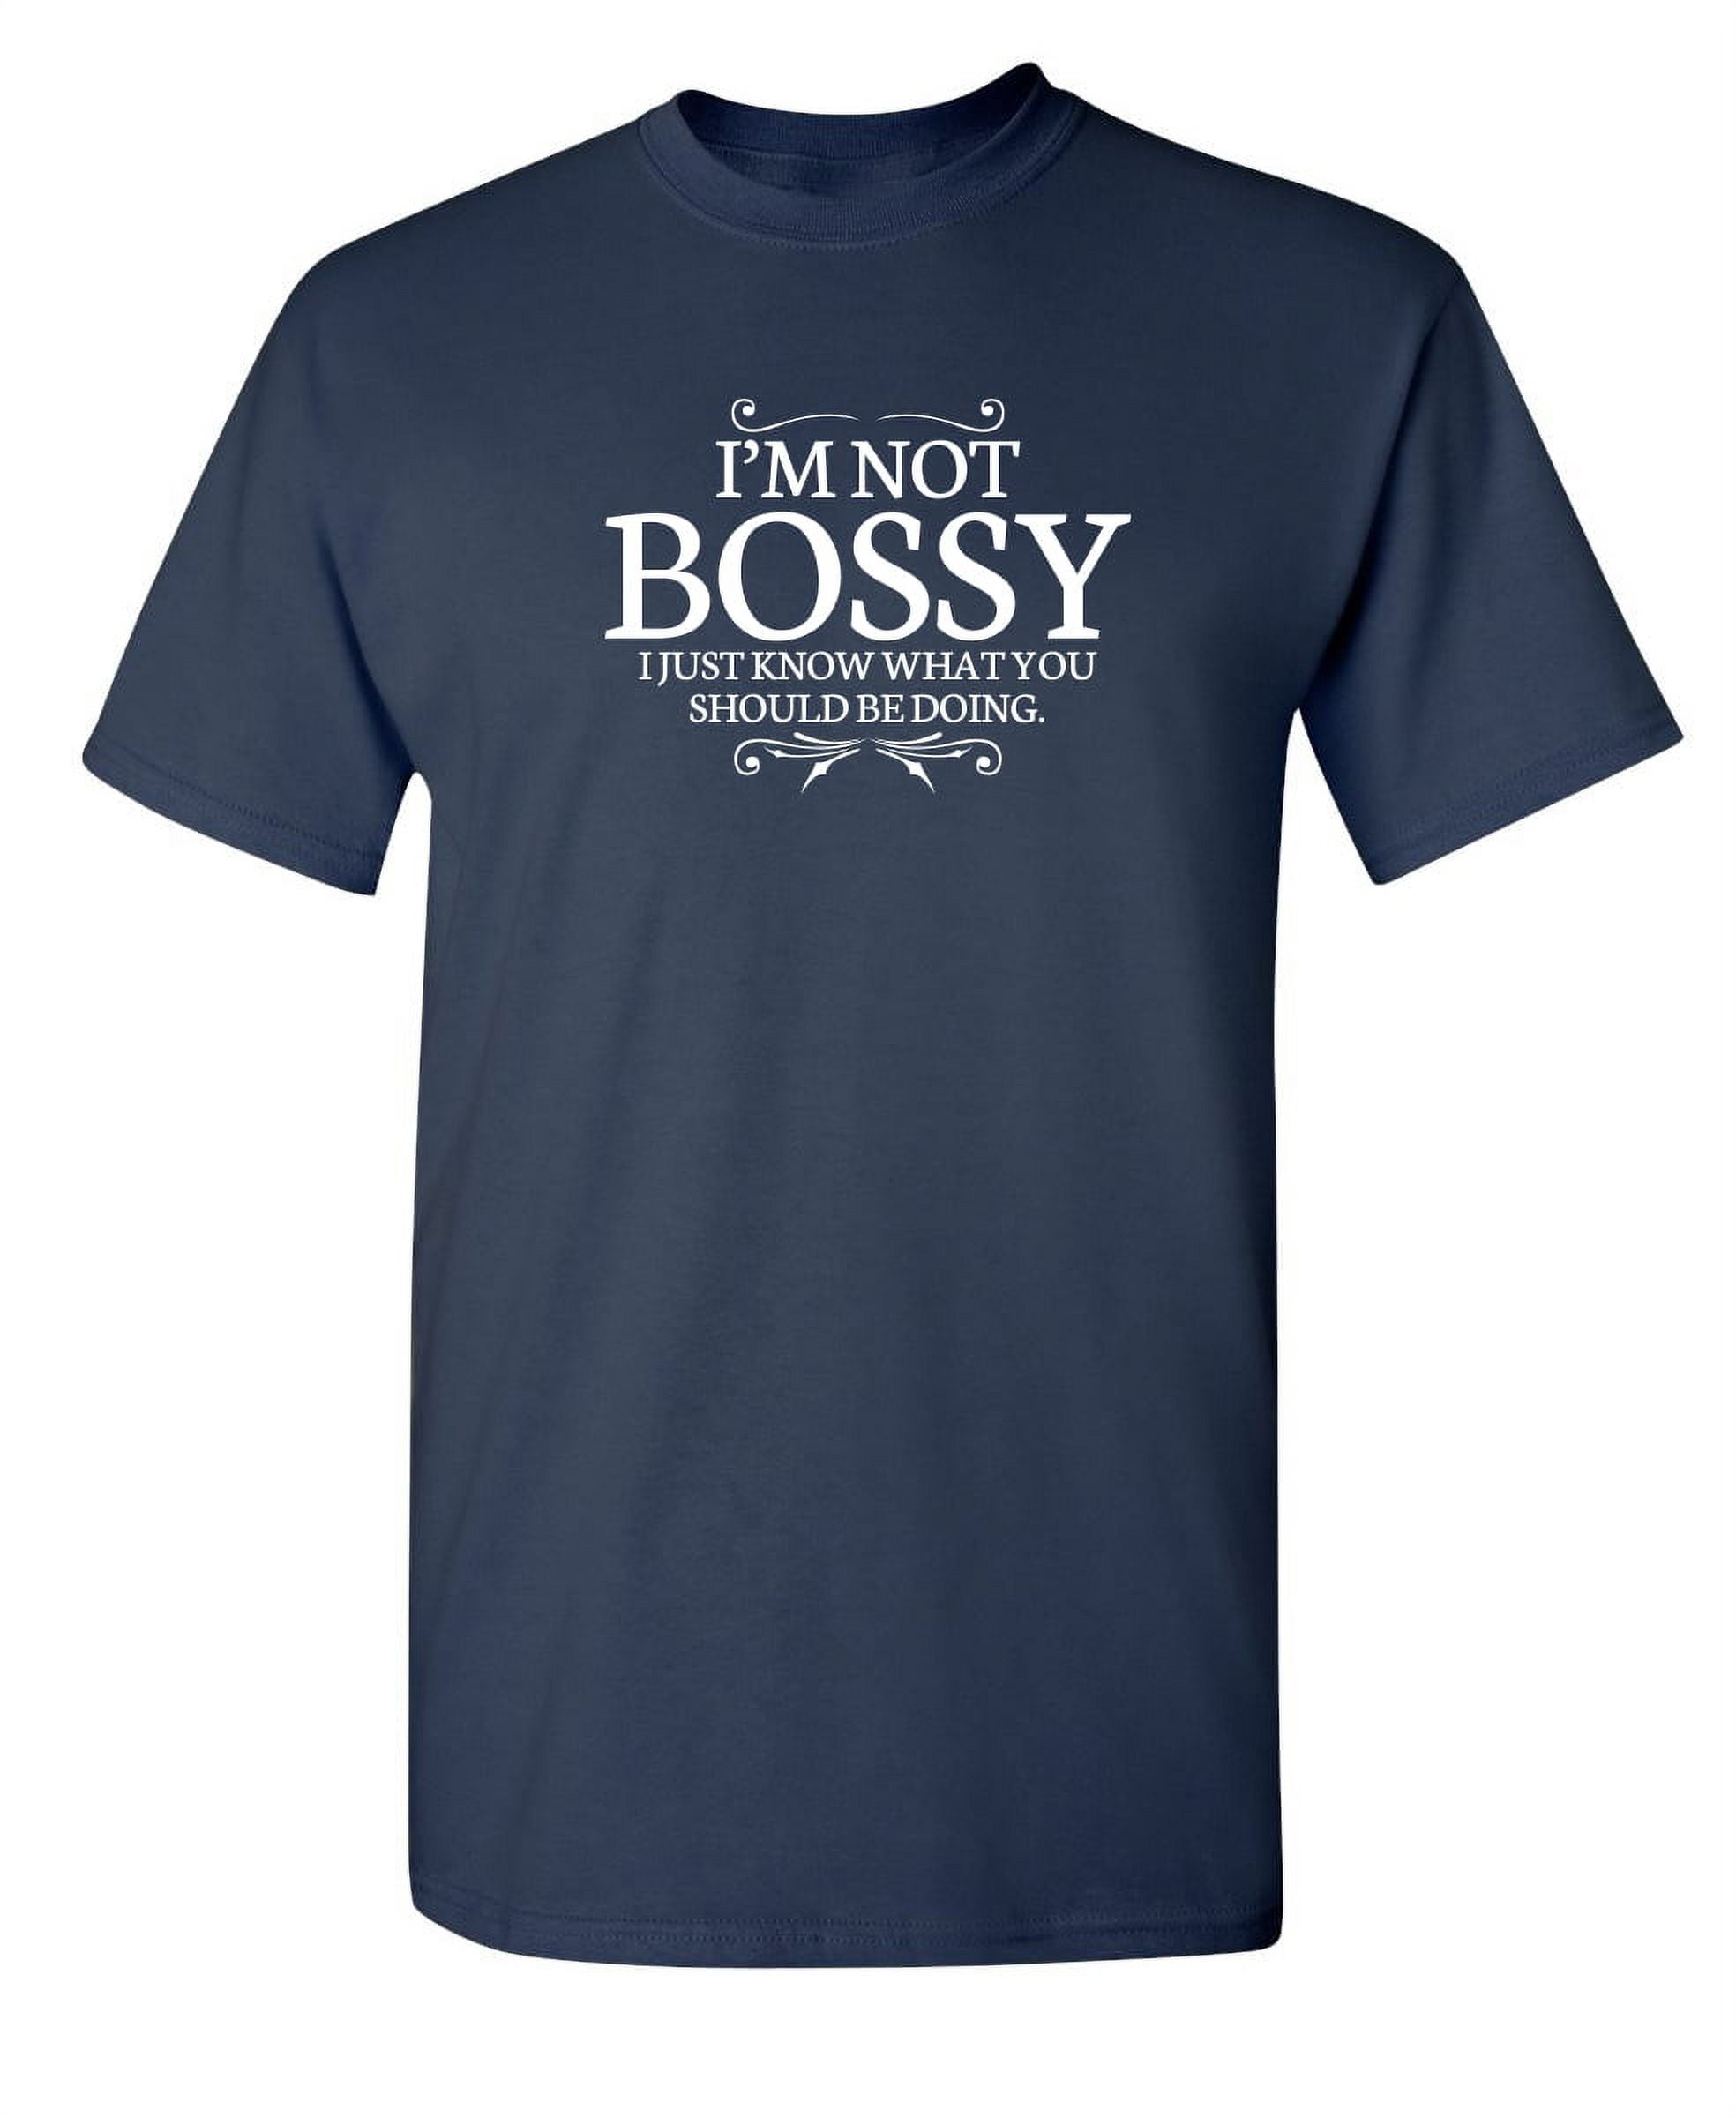 I'm Not Bossy Sarcastic Humor Graphic Novelty Super Soft Ring